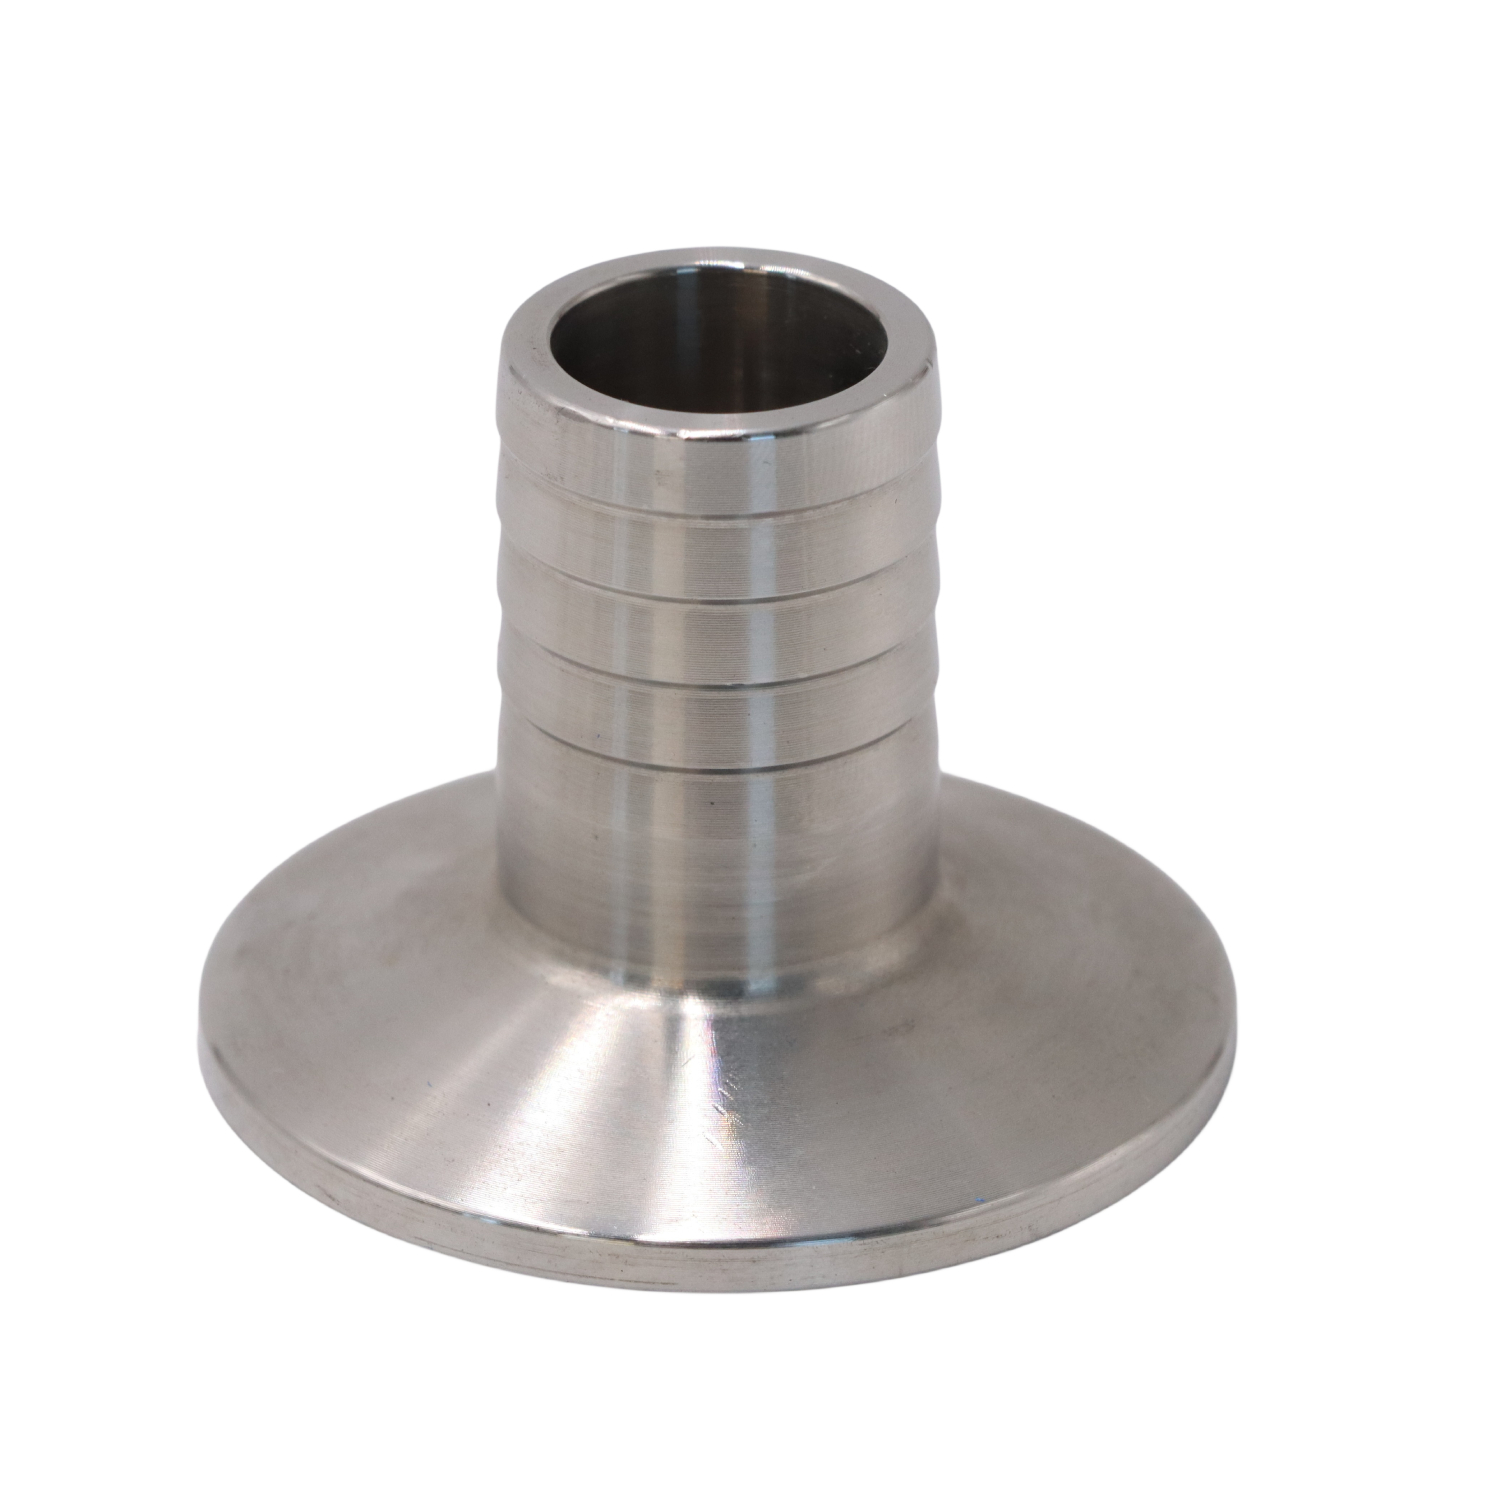 SS316 Stainless Steel Food Grade High Cleanliness JN-FL 23 2008 High Pressure Clamped Hose Coupling Nipple For Drinks